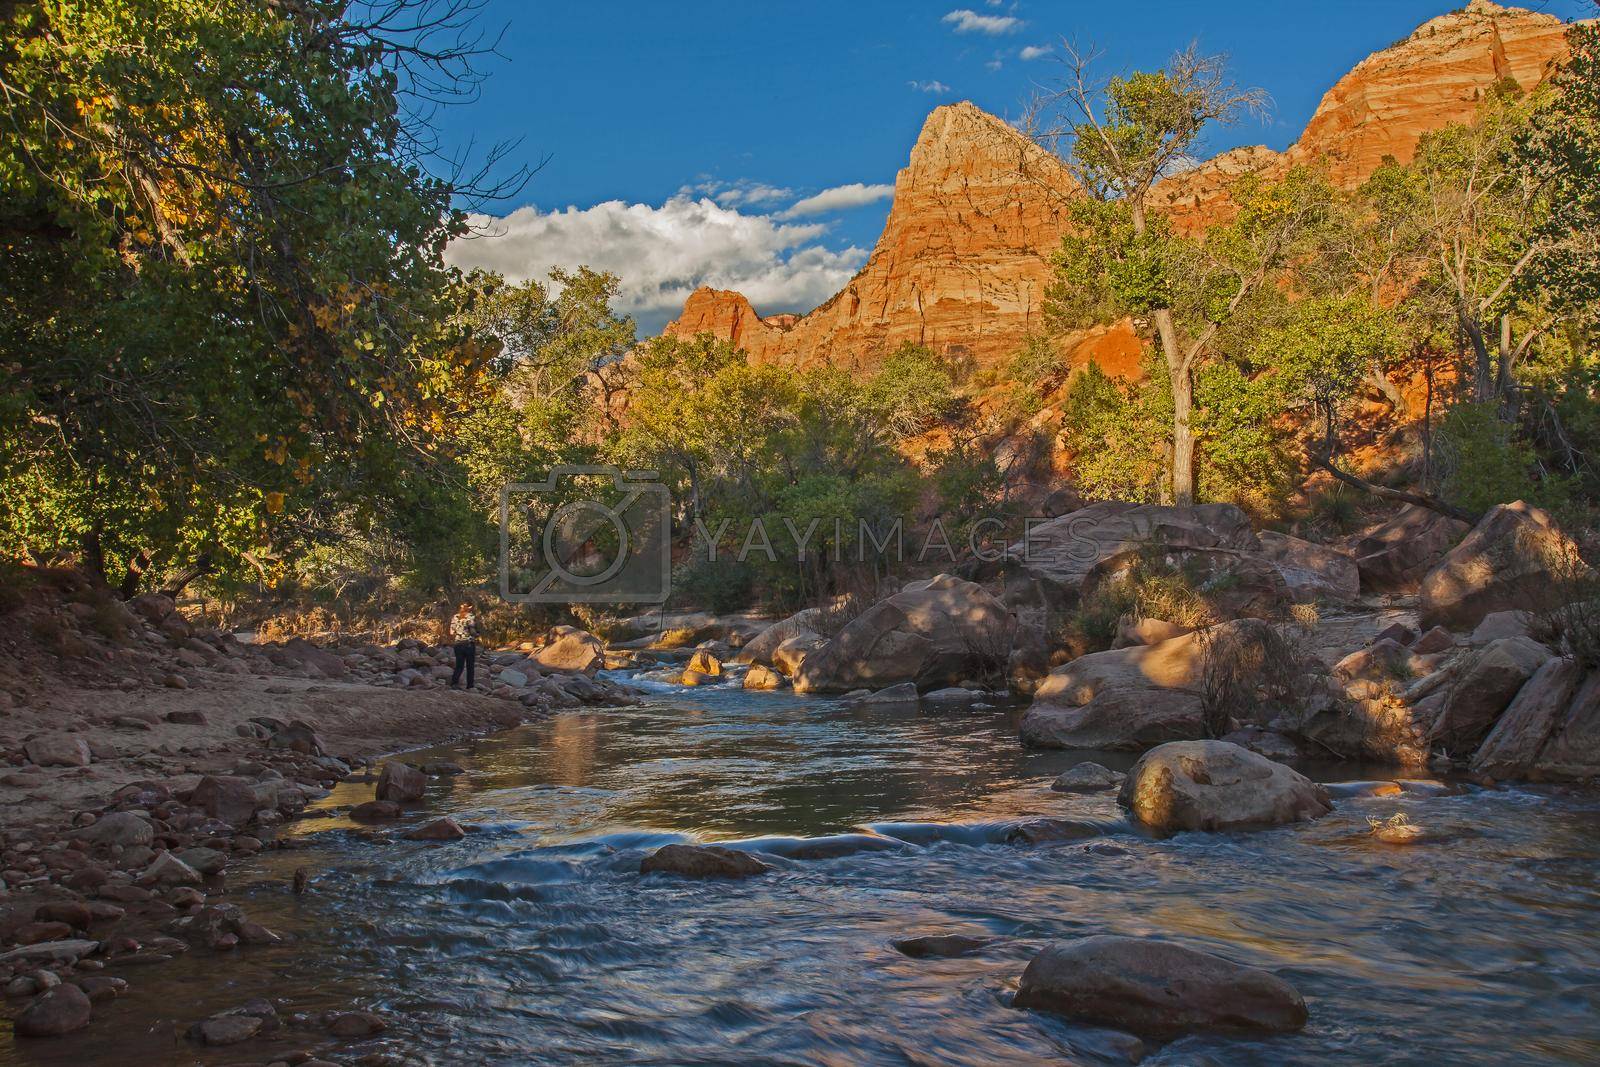 Royalty free image of Virgin River Zion National Park 2569 by kobus_peche